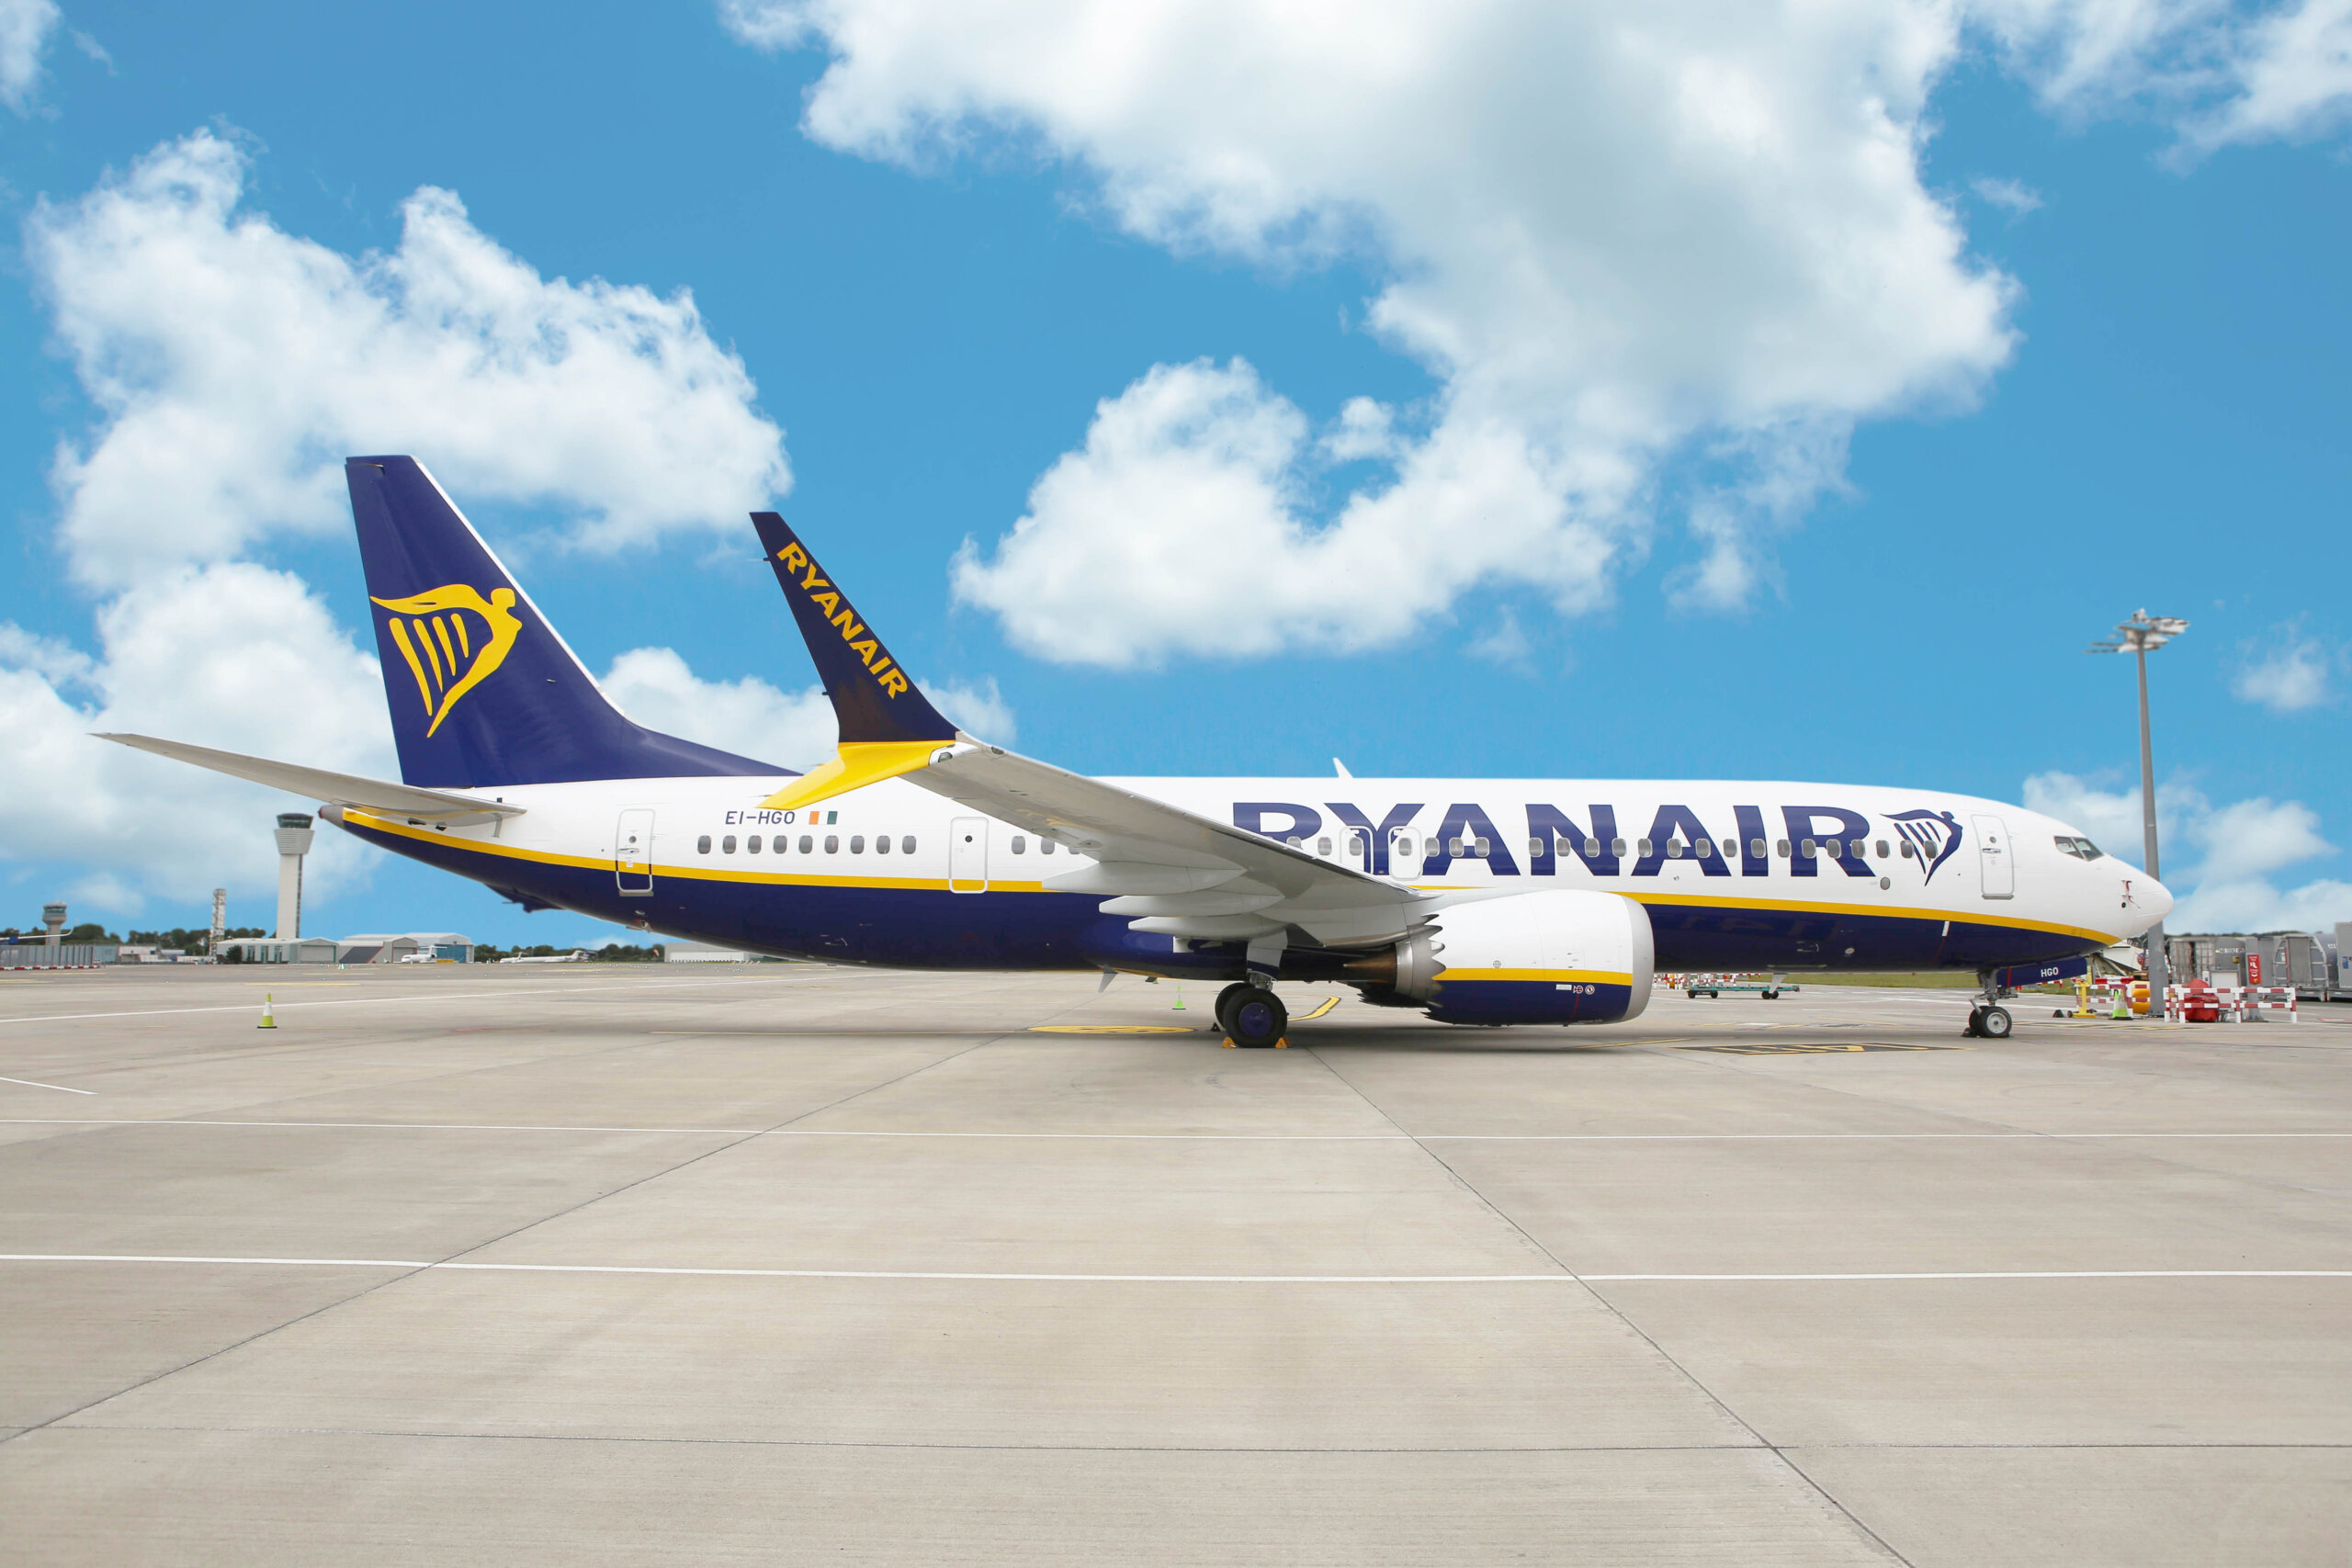 RYANAIR MAY TRAFFIC GROWS 11% TO 18.9M GUESTS